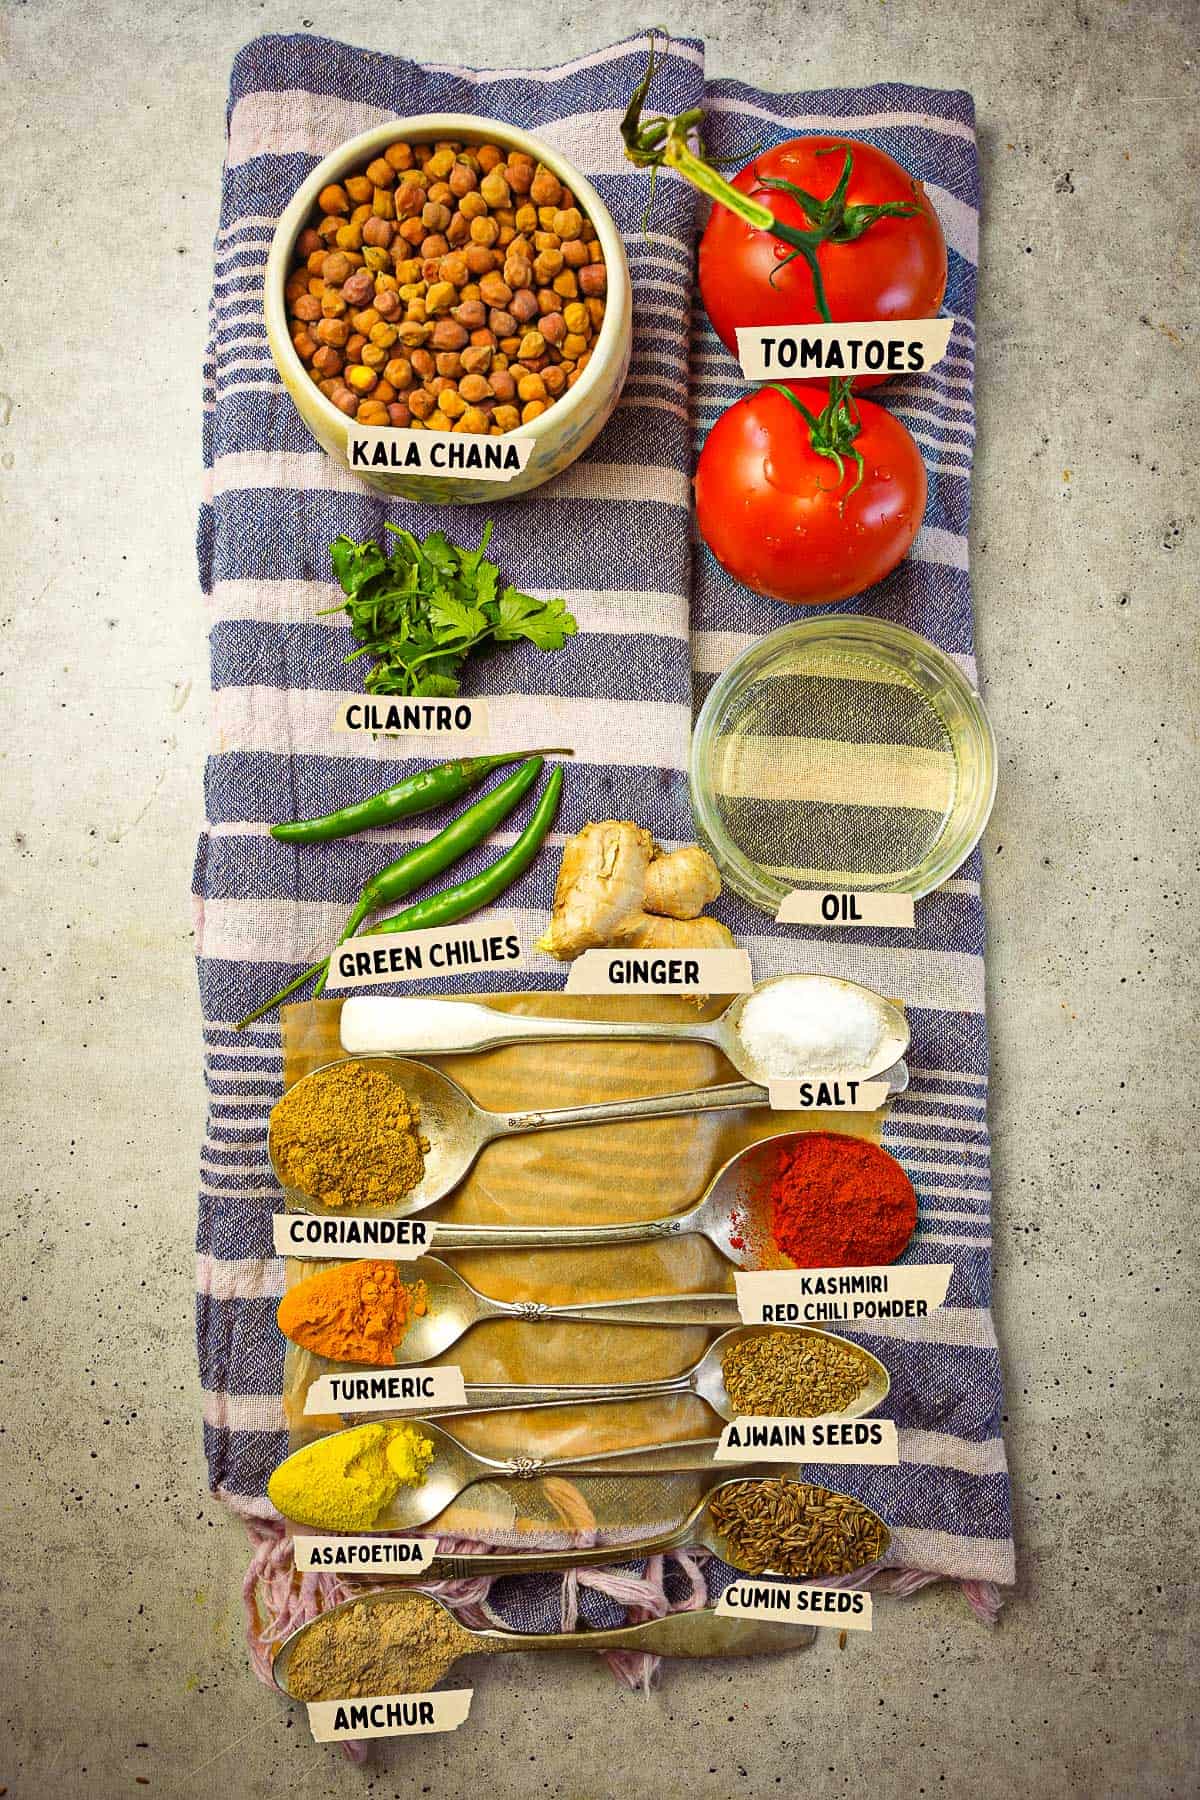 The ingredients for making kala chana are measured out and labeled on a cloth topped table.